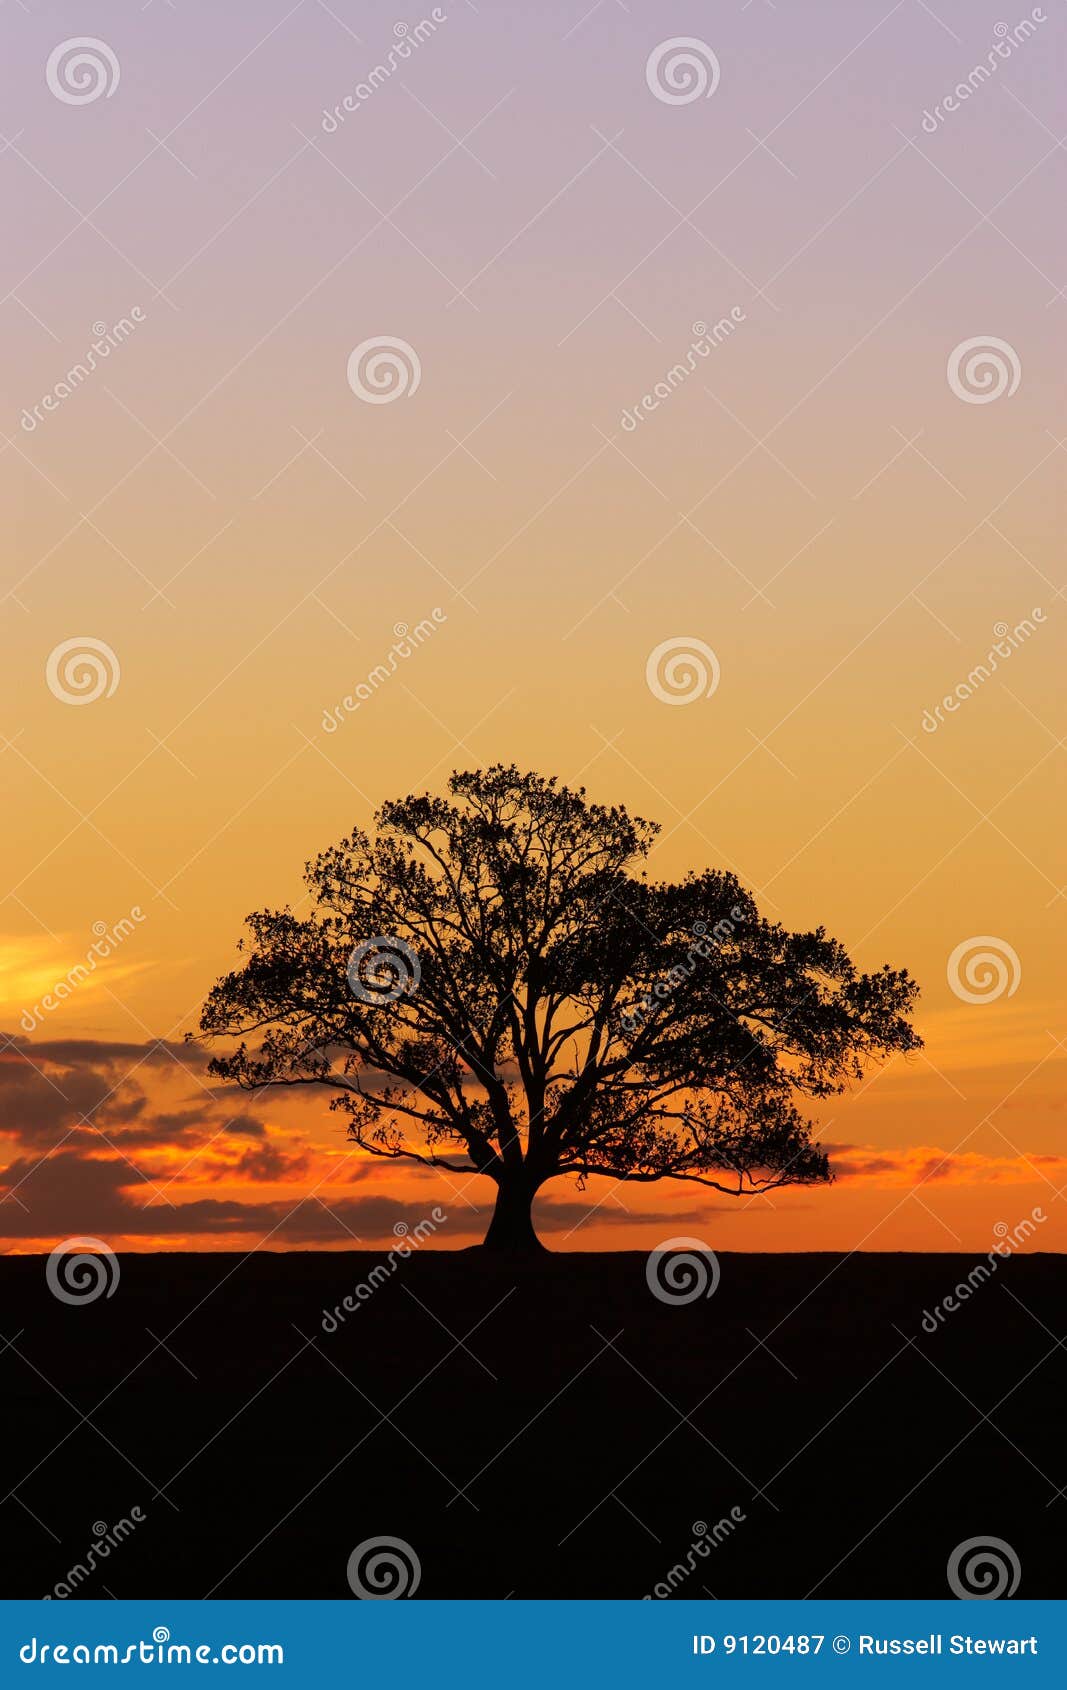 single tree stands on a hill at sunset forming a bold silhouette.